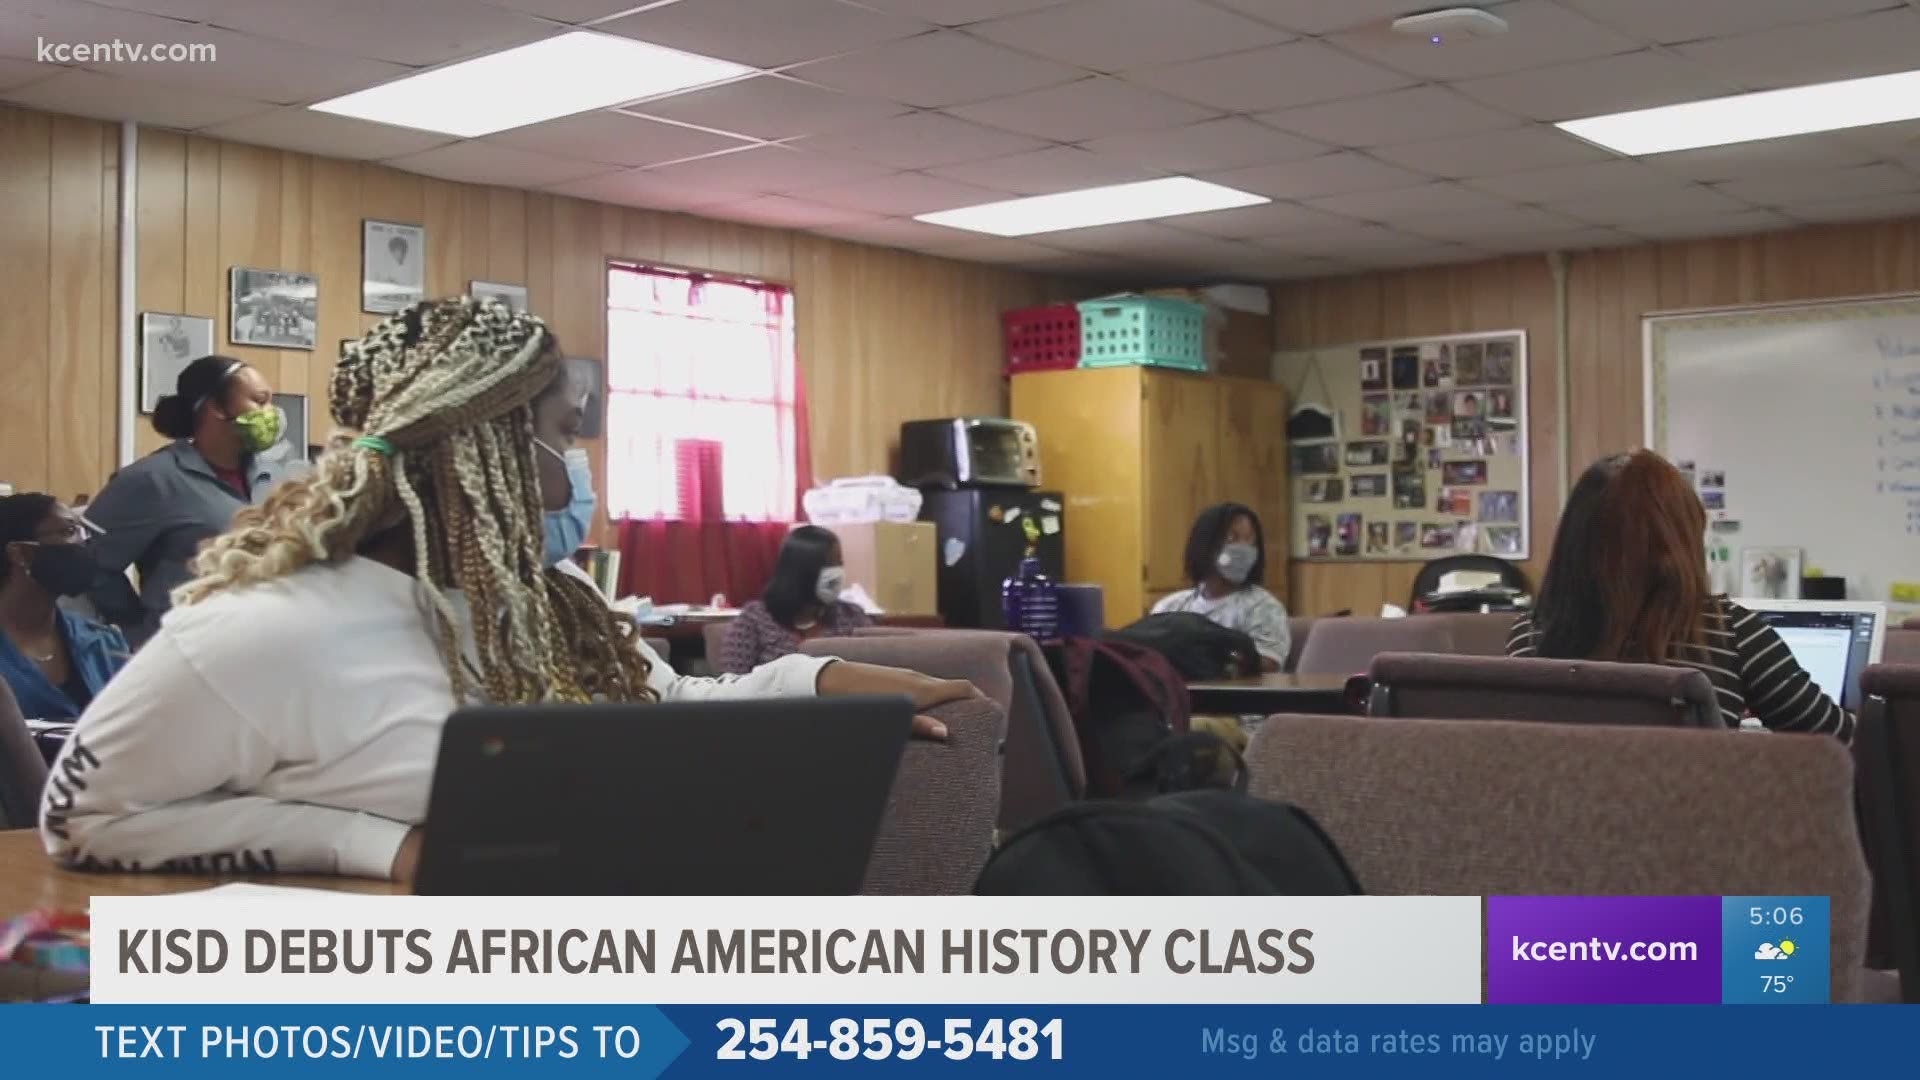 This is the first year KISD is able to teach African American history where students talk about African traditions, the slave trade, civil rights and more.